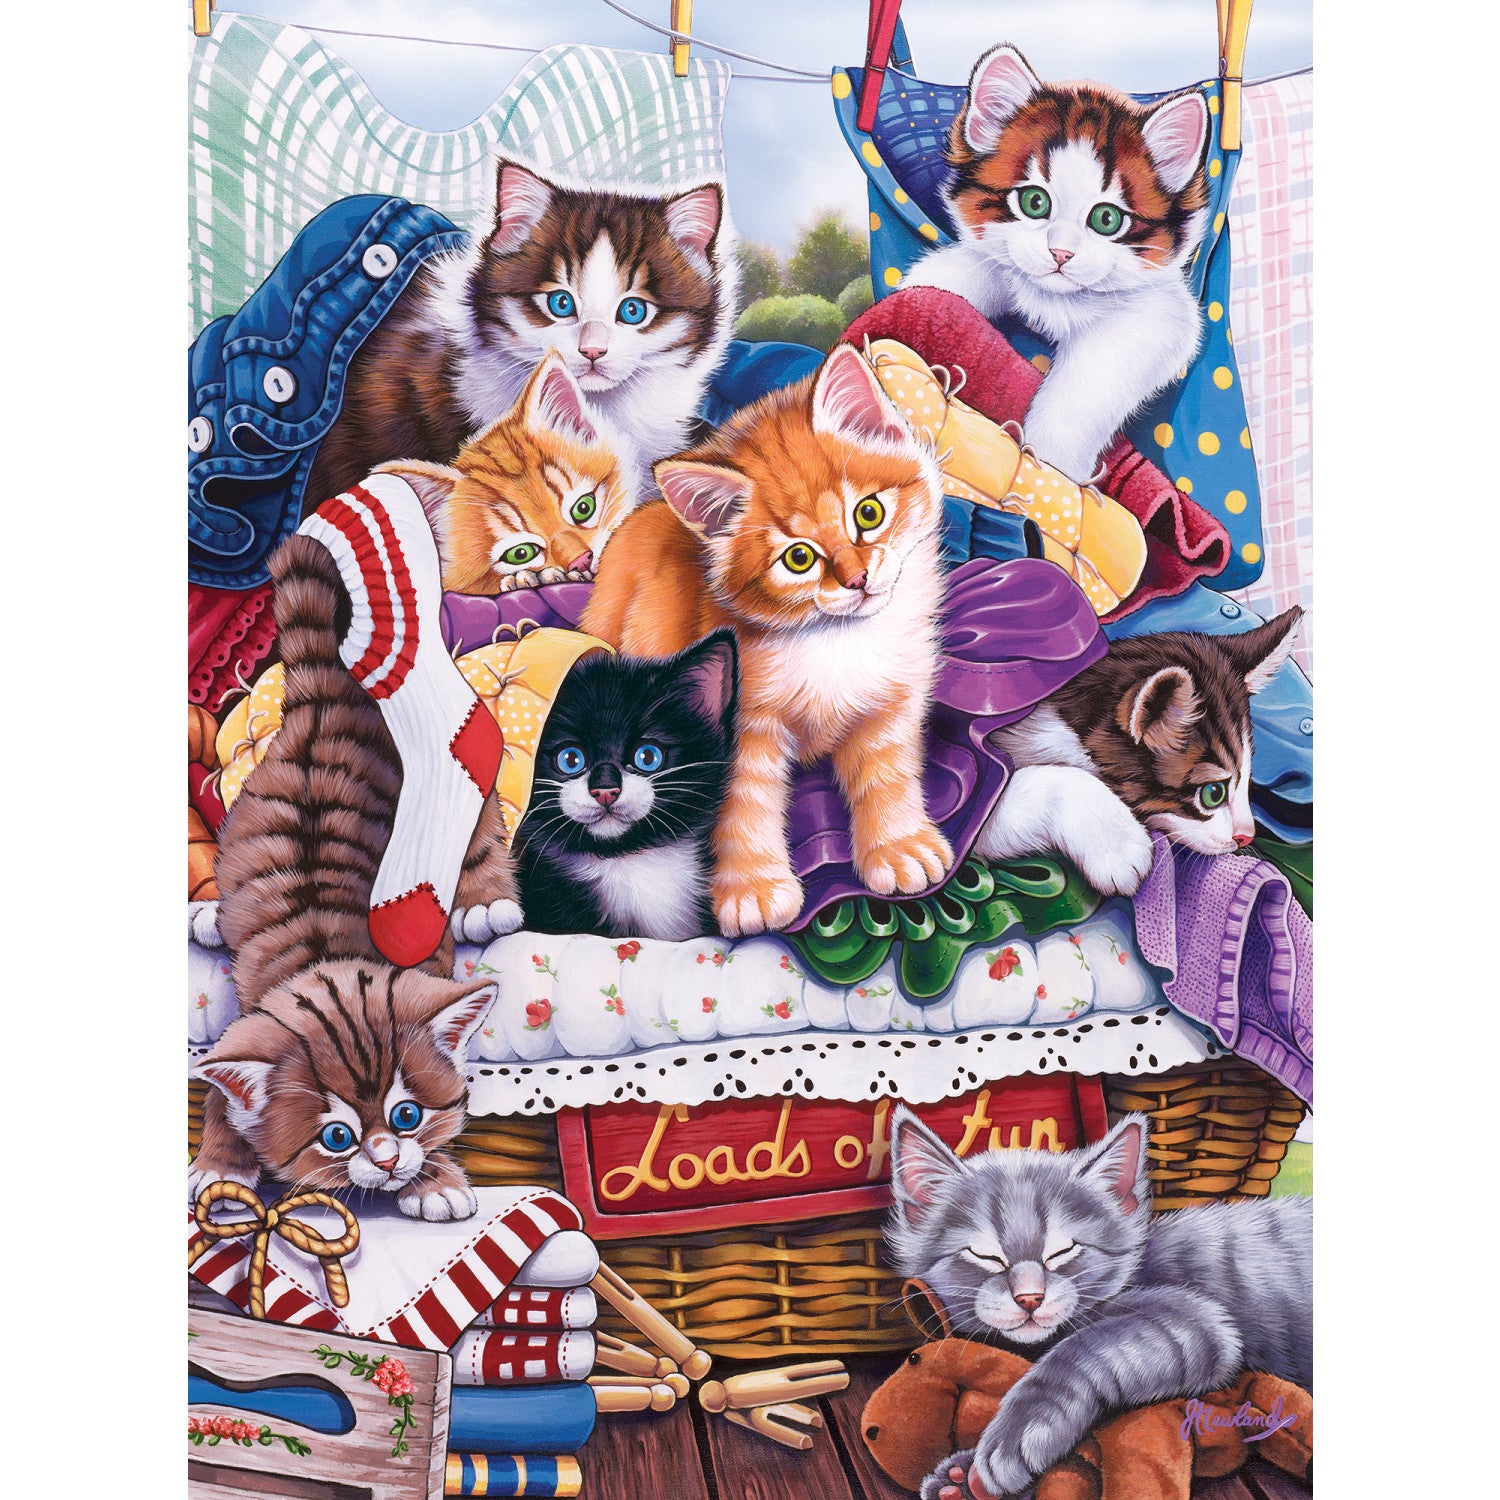 Playful Paws - Loads of Fun 300 Piece Puzzle